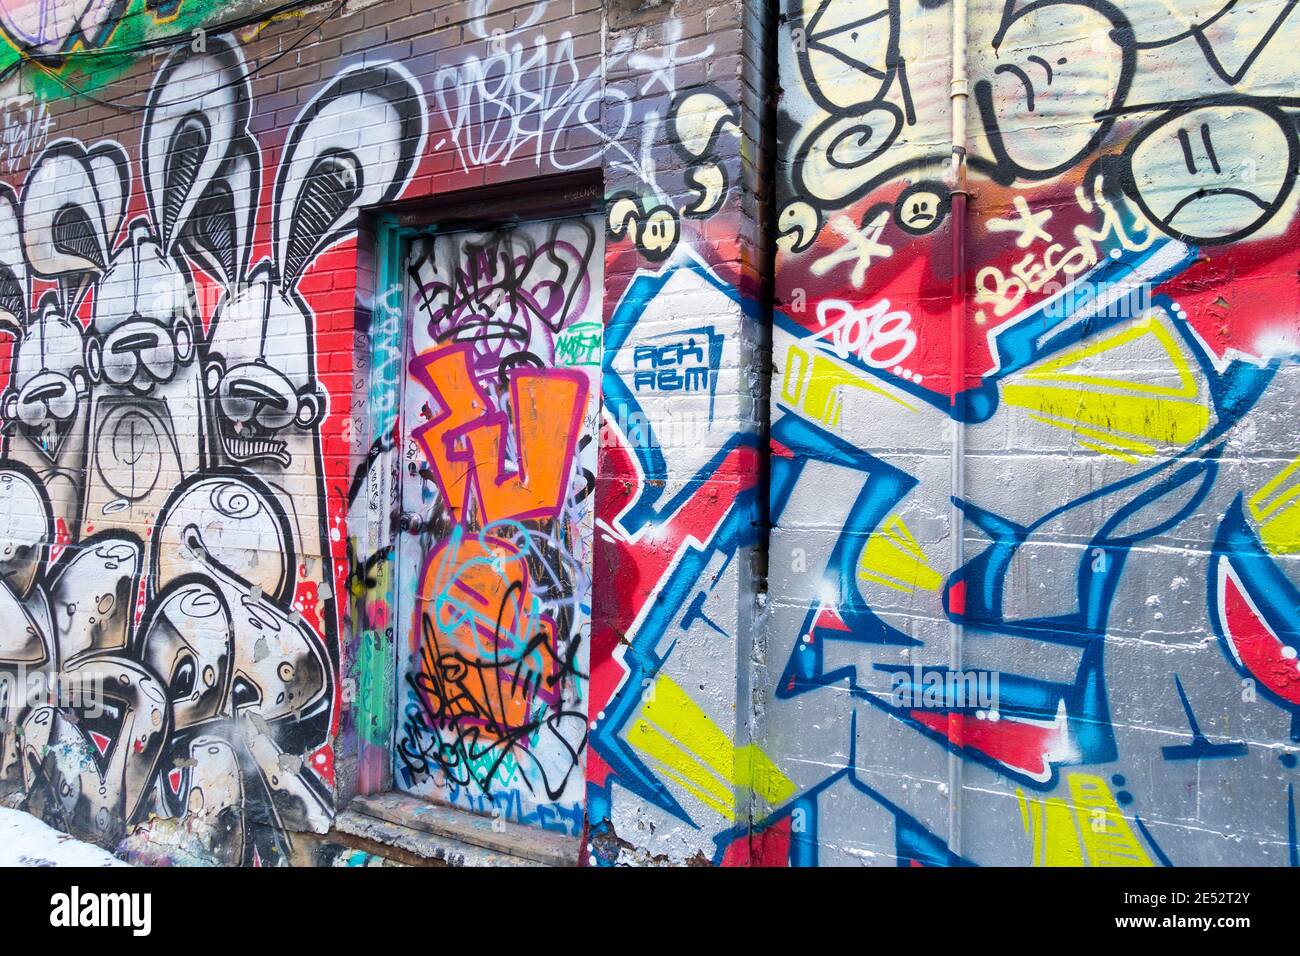 A large number of colourful wall paintings that have become a minor tourist attraction in an area known as Graffiti Alley in Toronto Ontario Canada Stock Photo